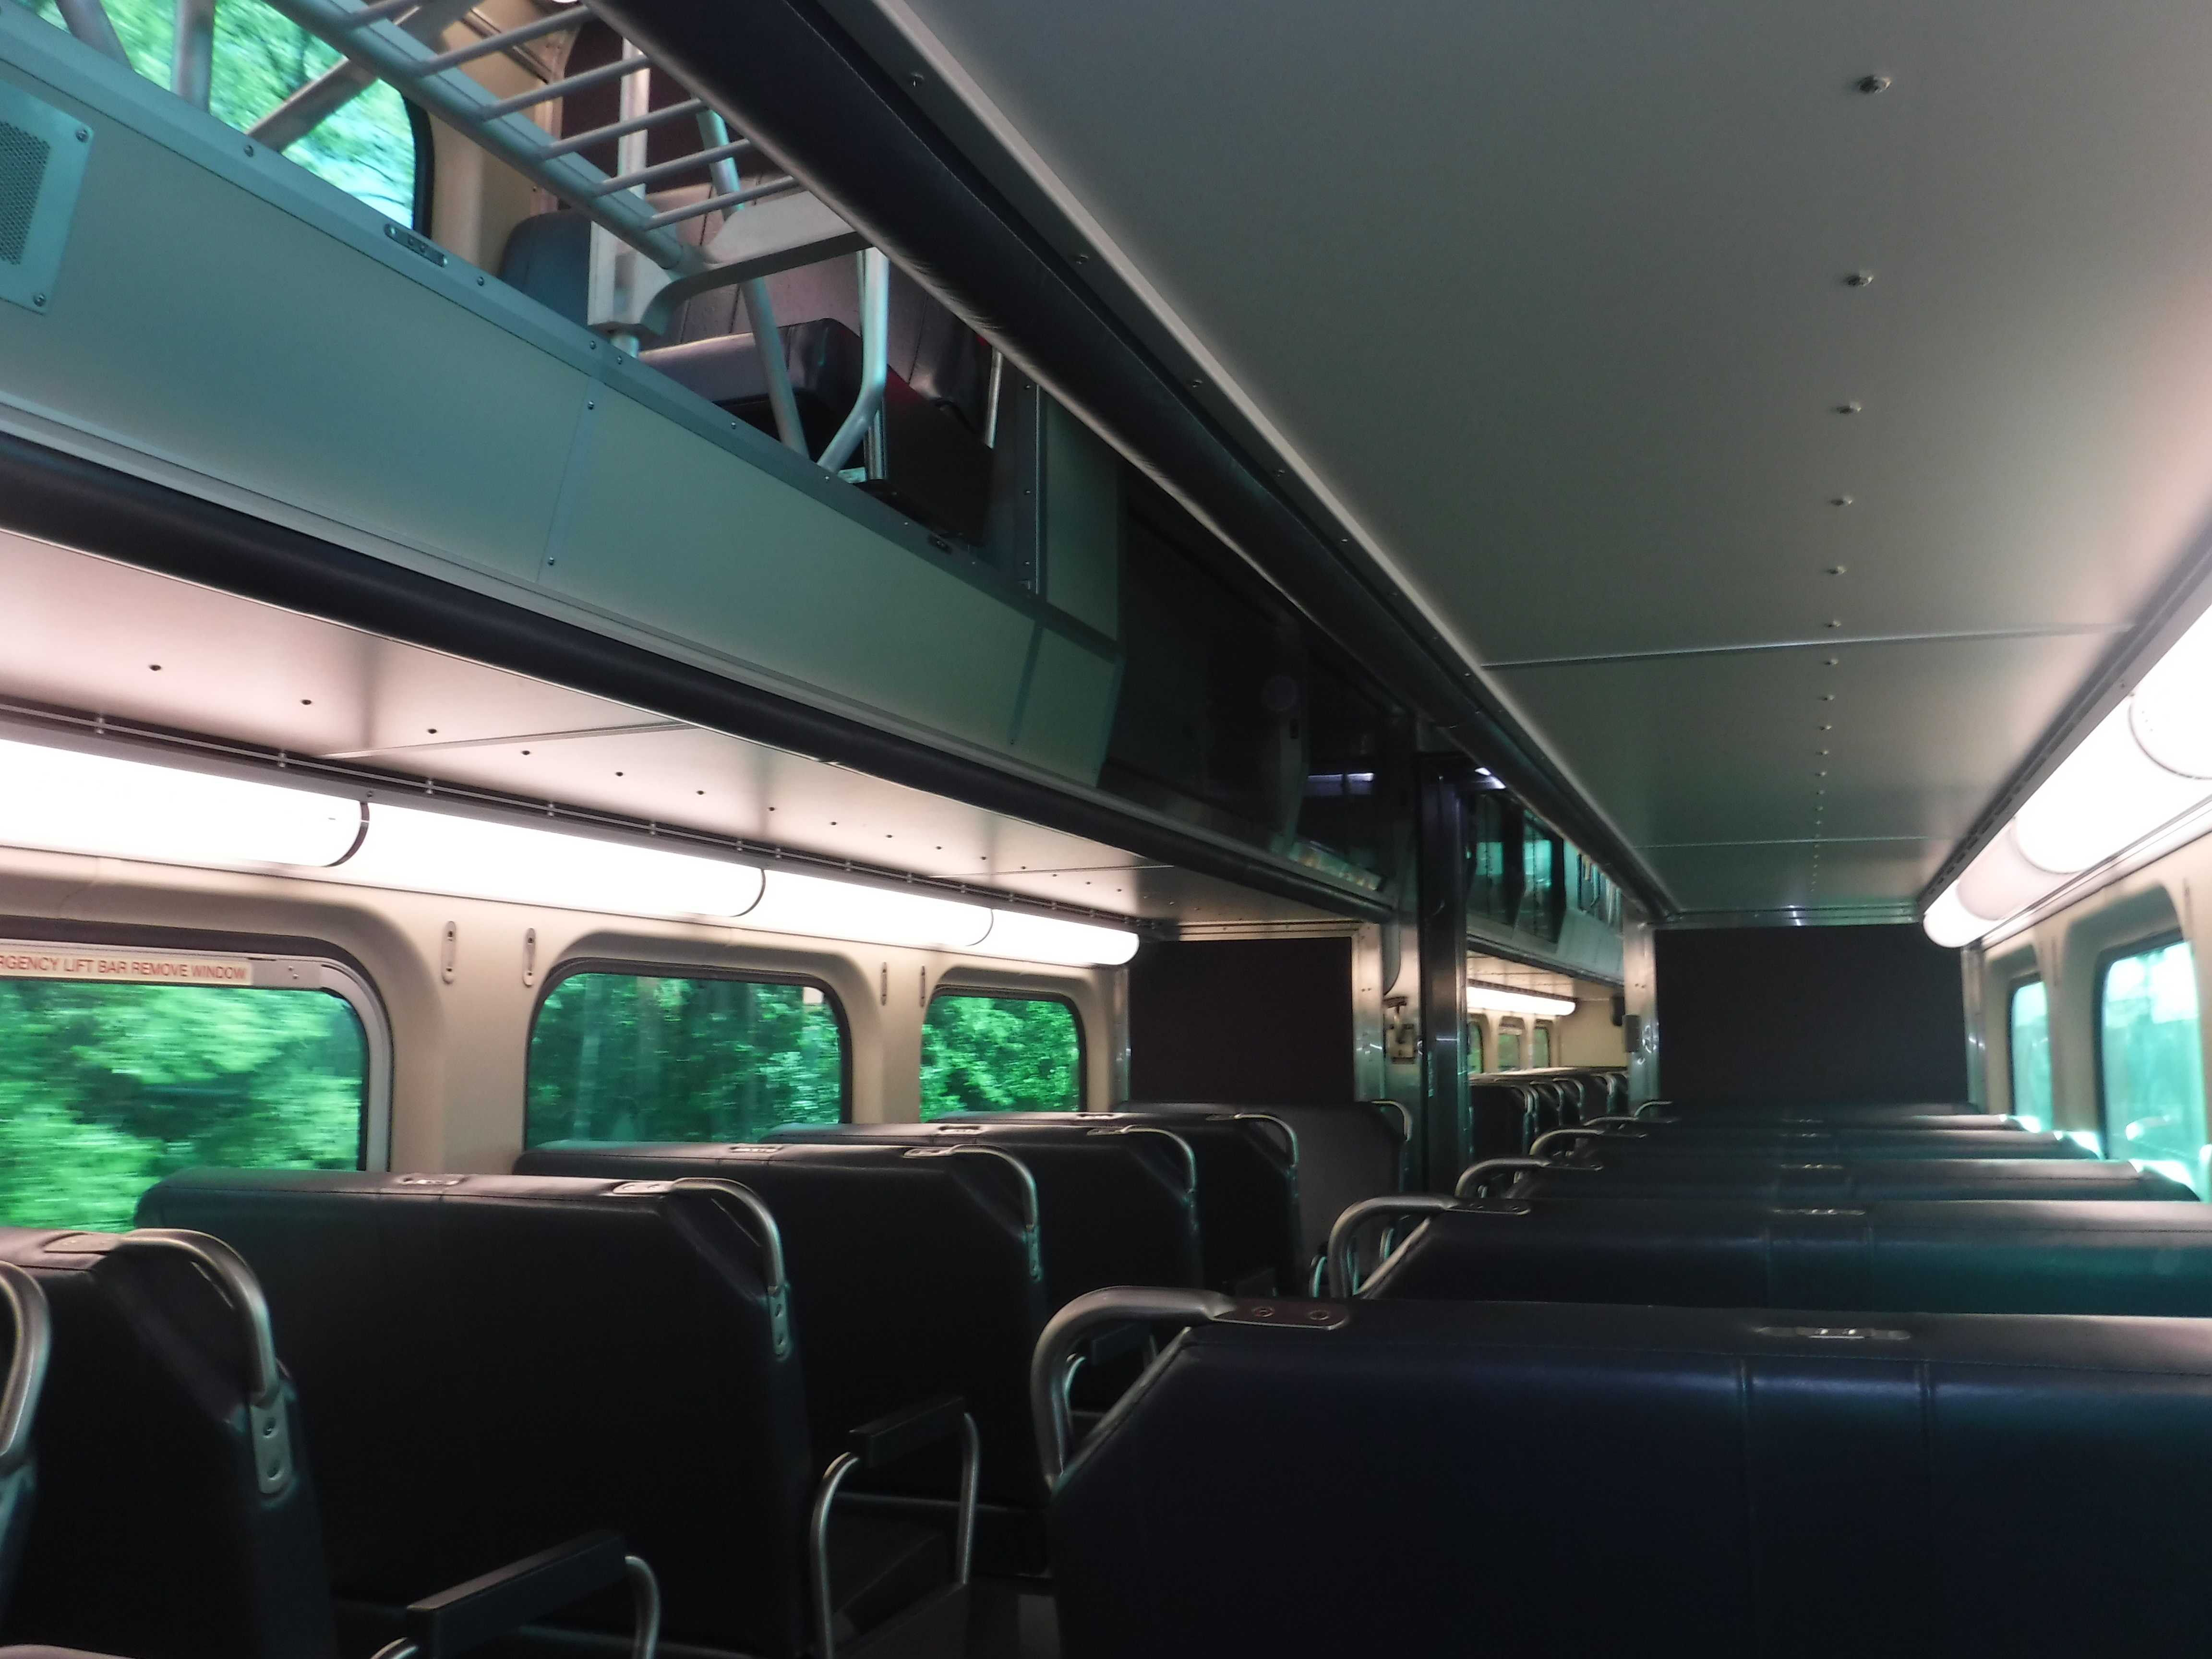 metra proposes major south side service overhaul - chronicle media